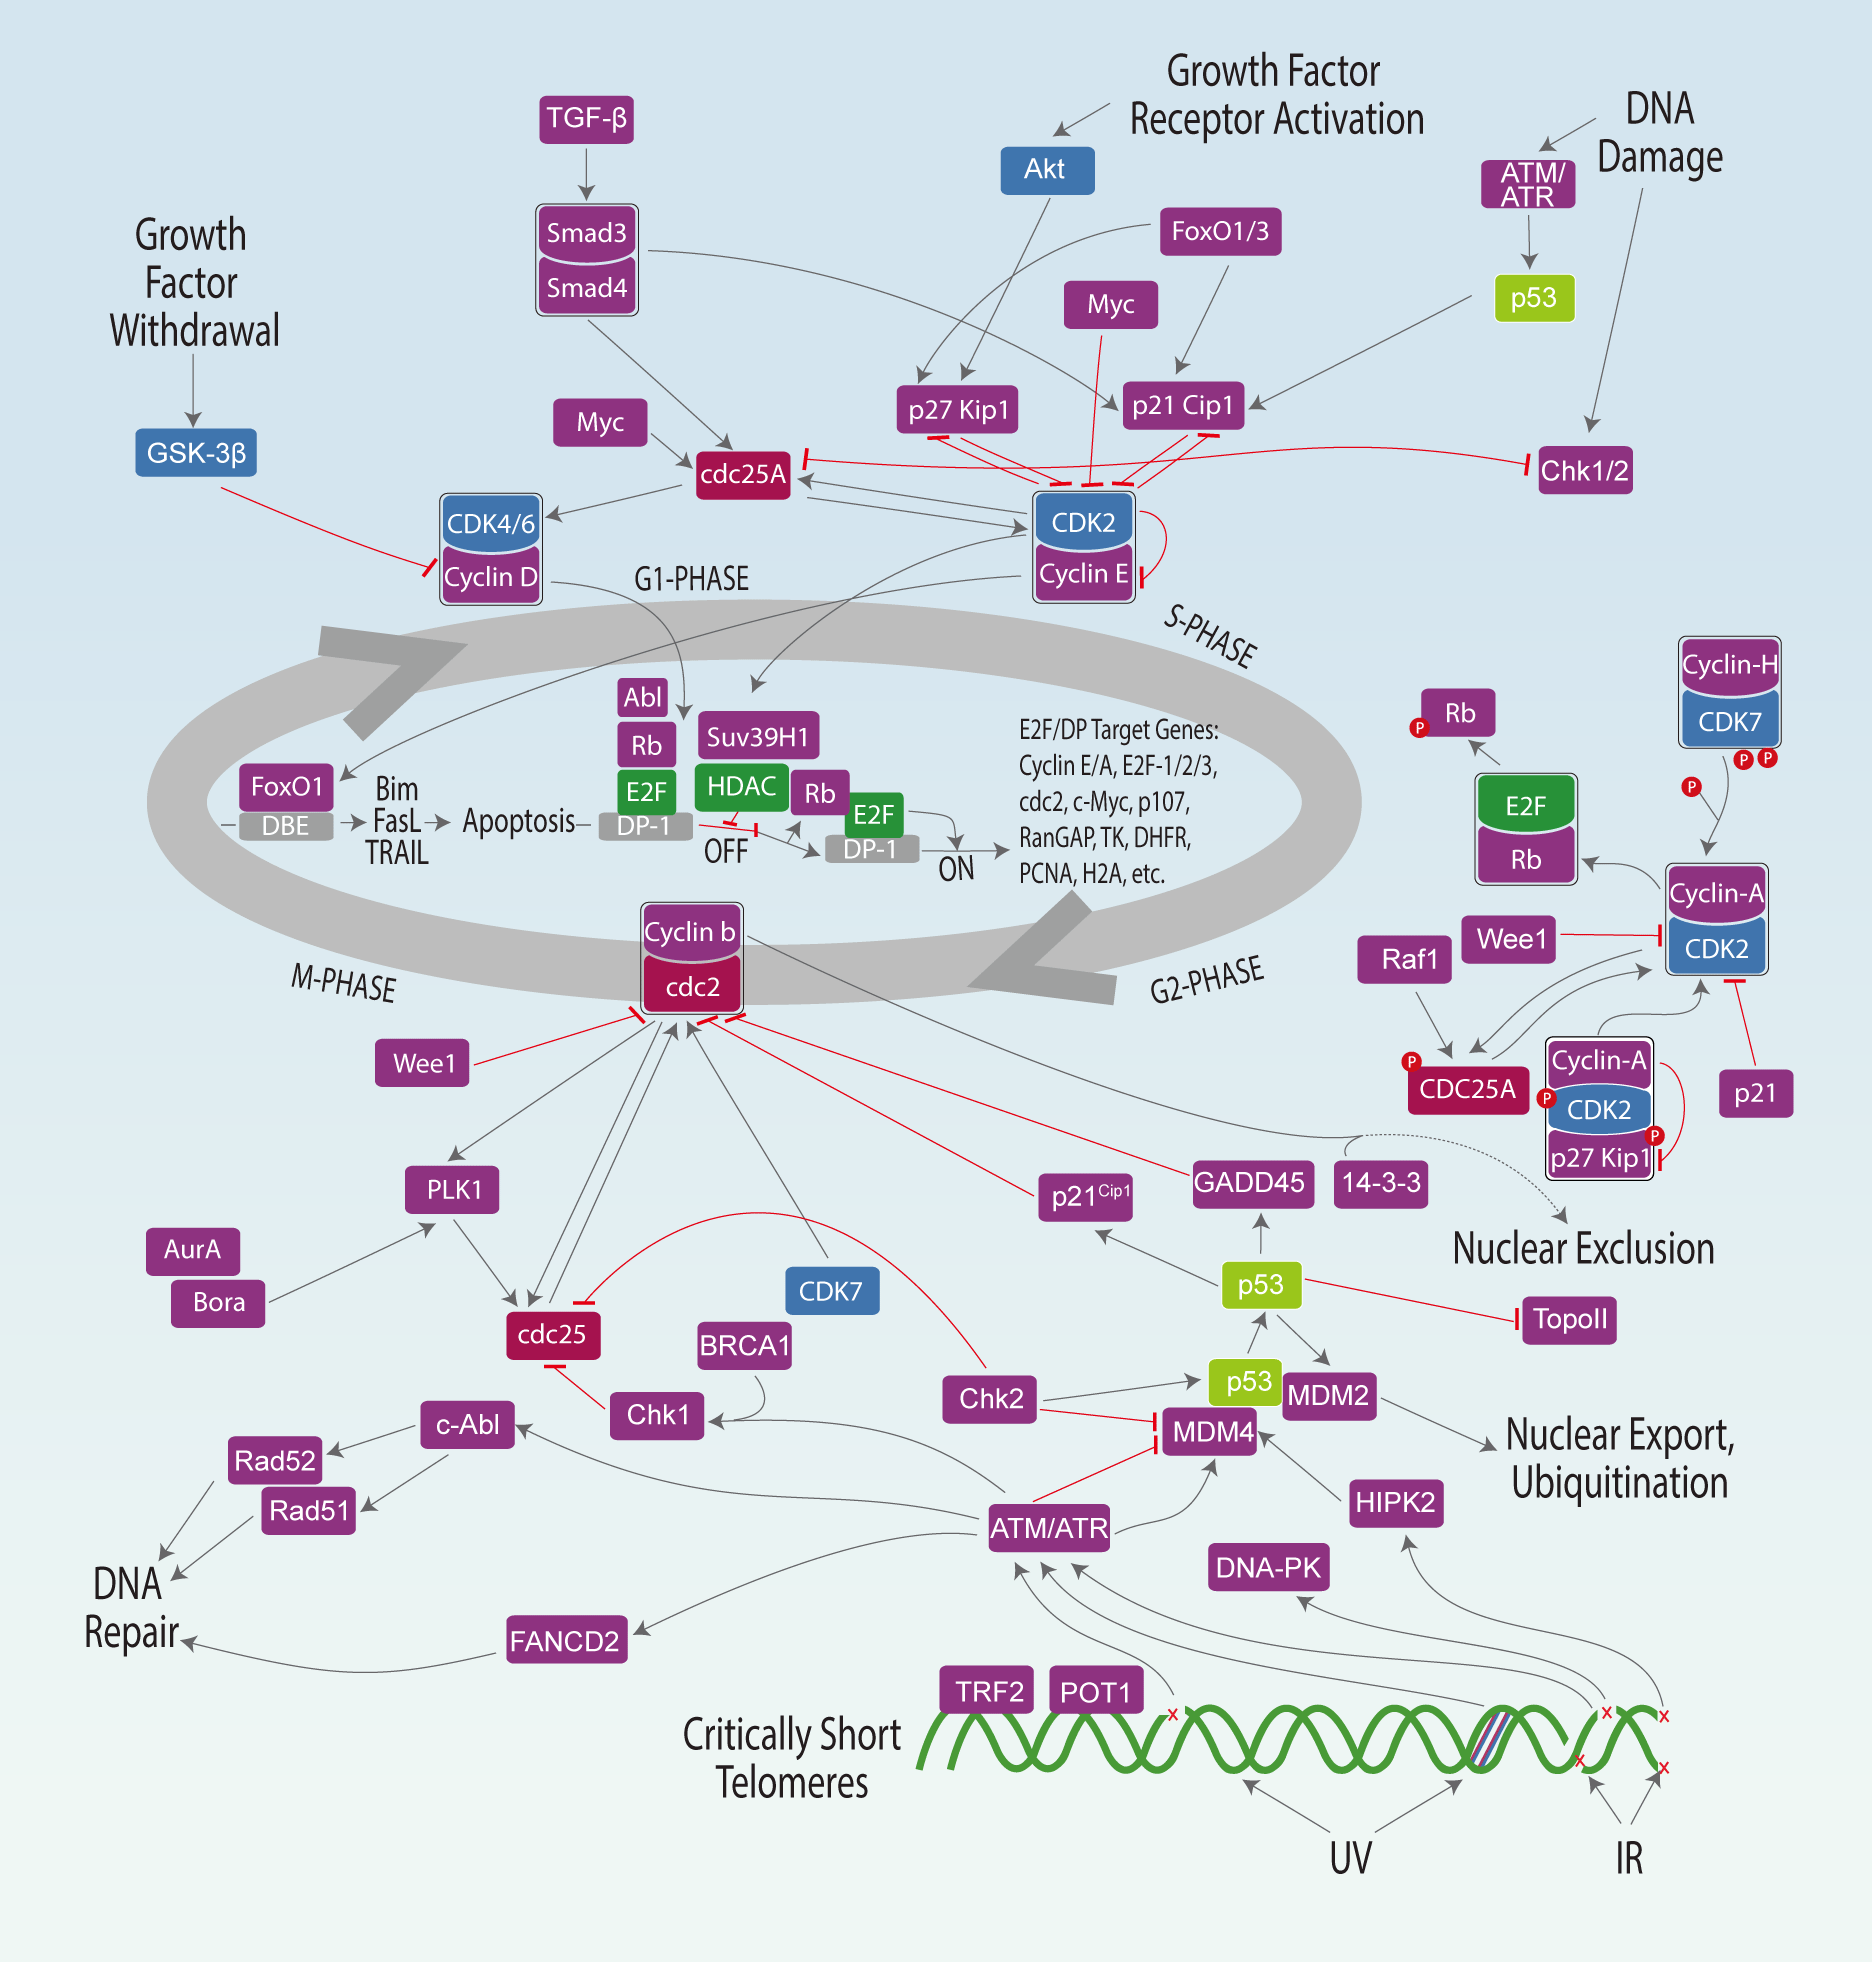 cell-cycle-signaling-pathway-abmole-bioscience